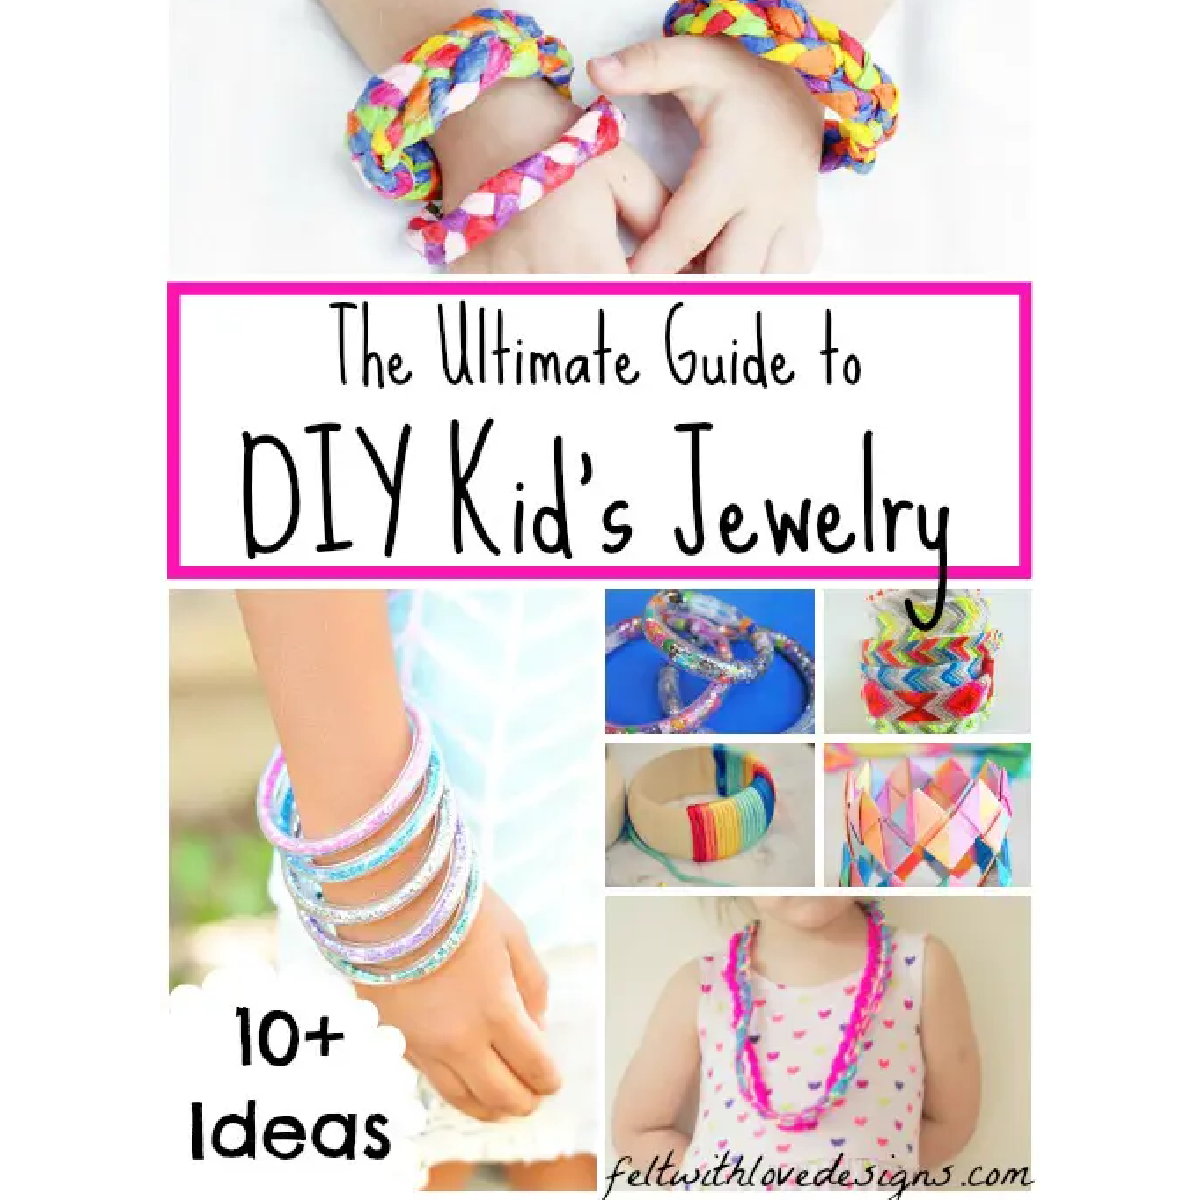 Dress up ideas- diy kid's jewelry with rings, necklaces, bracelets- kids activities blog